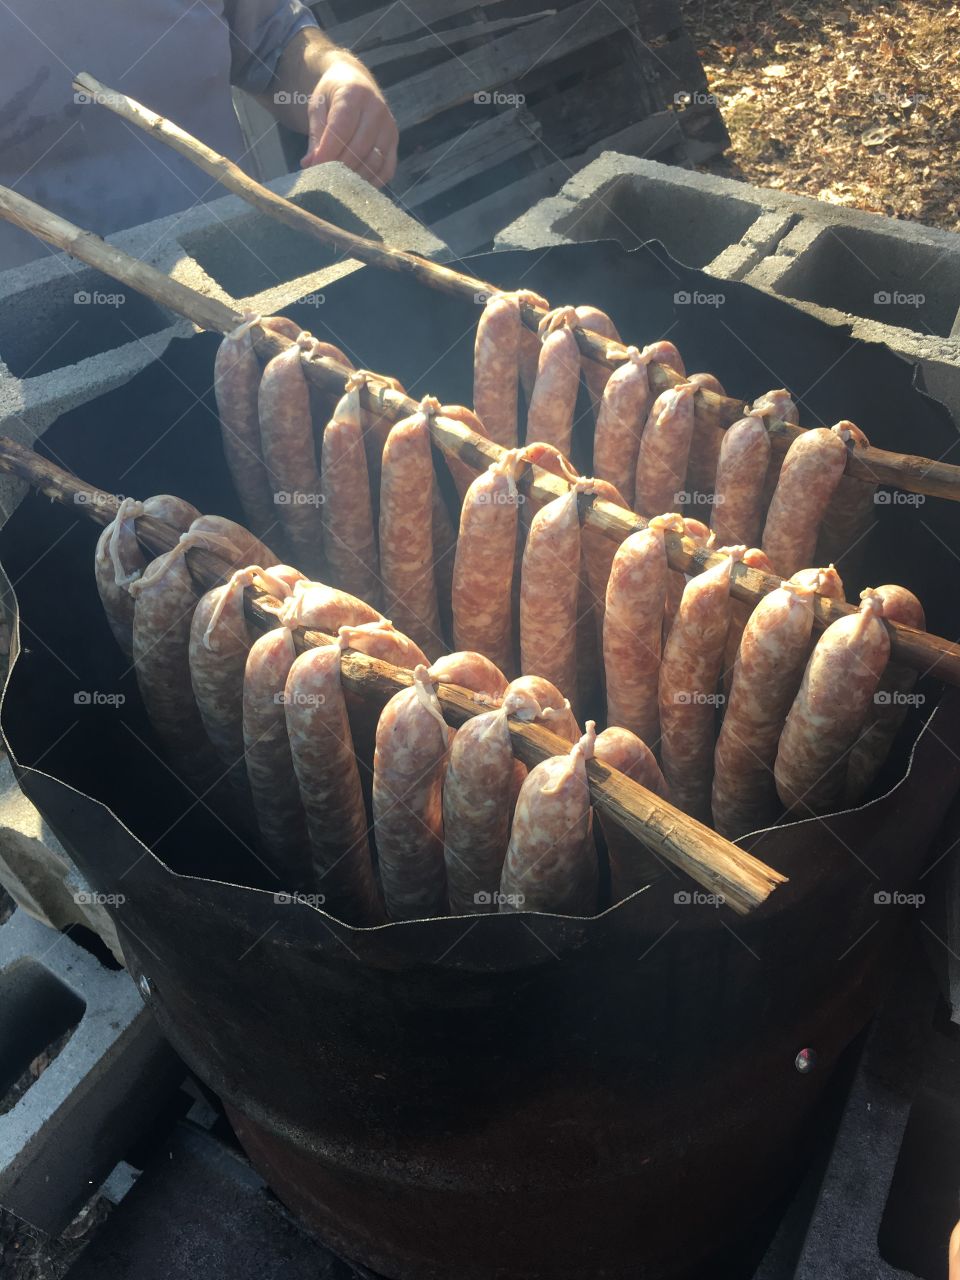 Sausages in homemade smoker